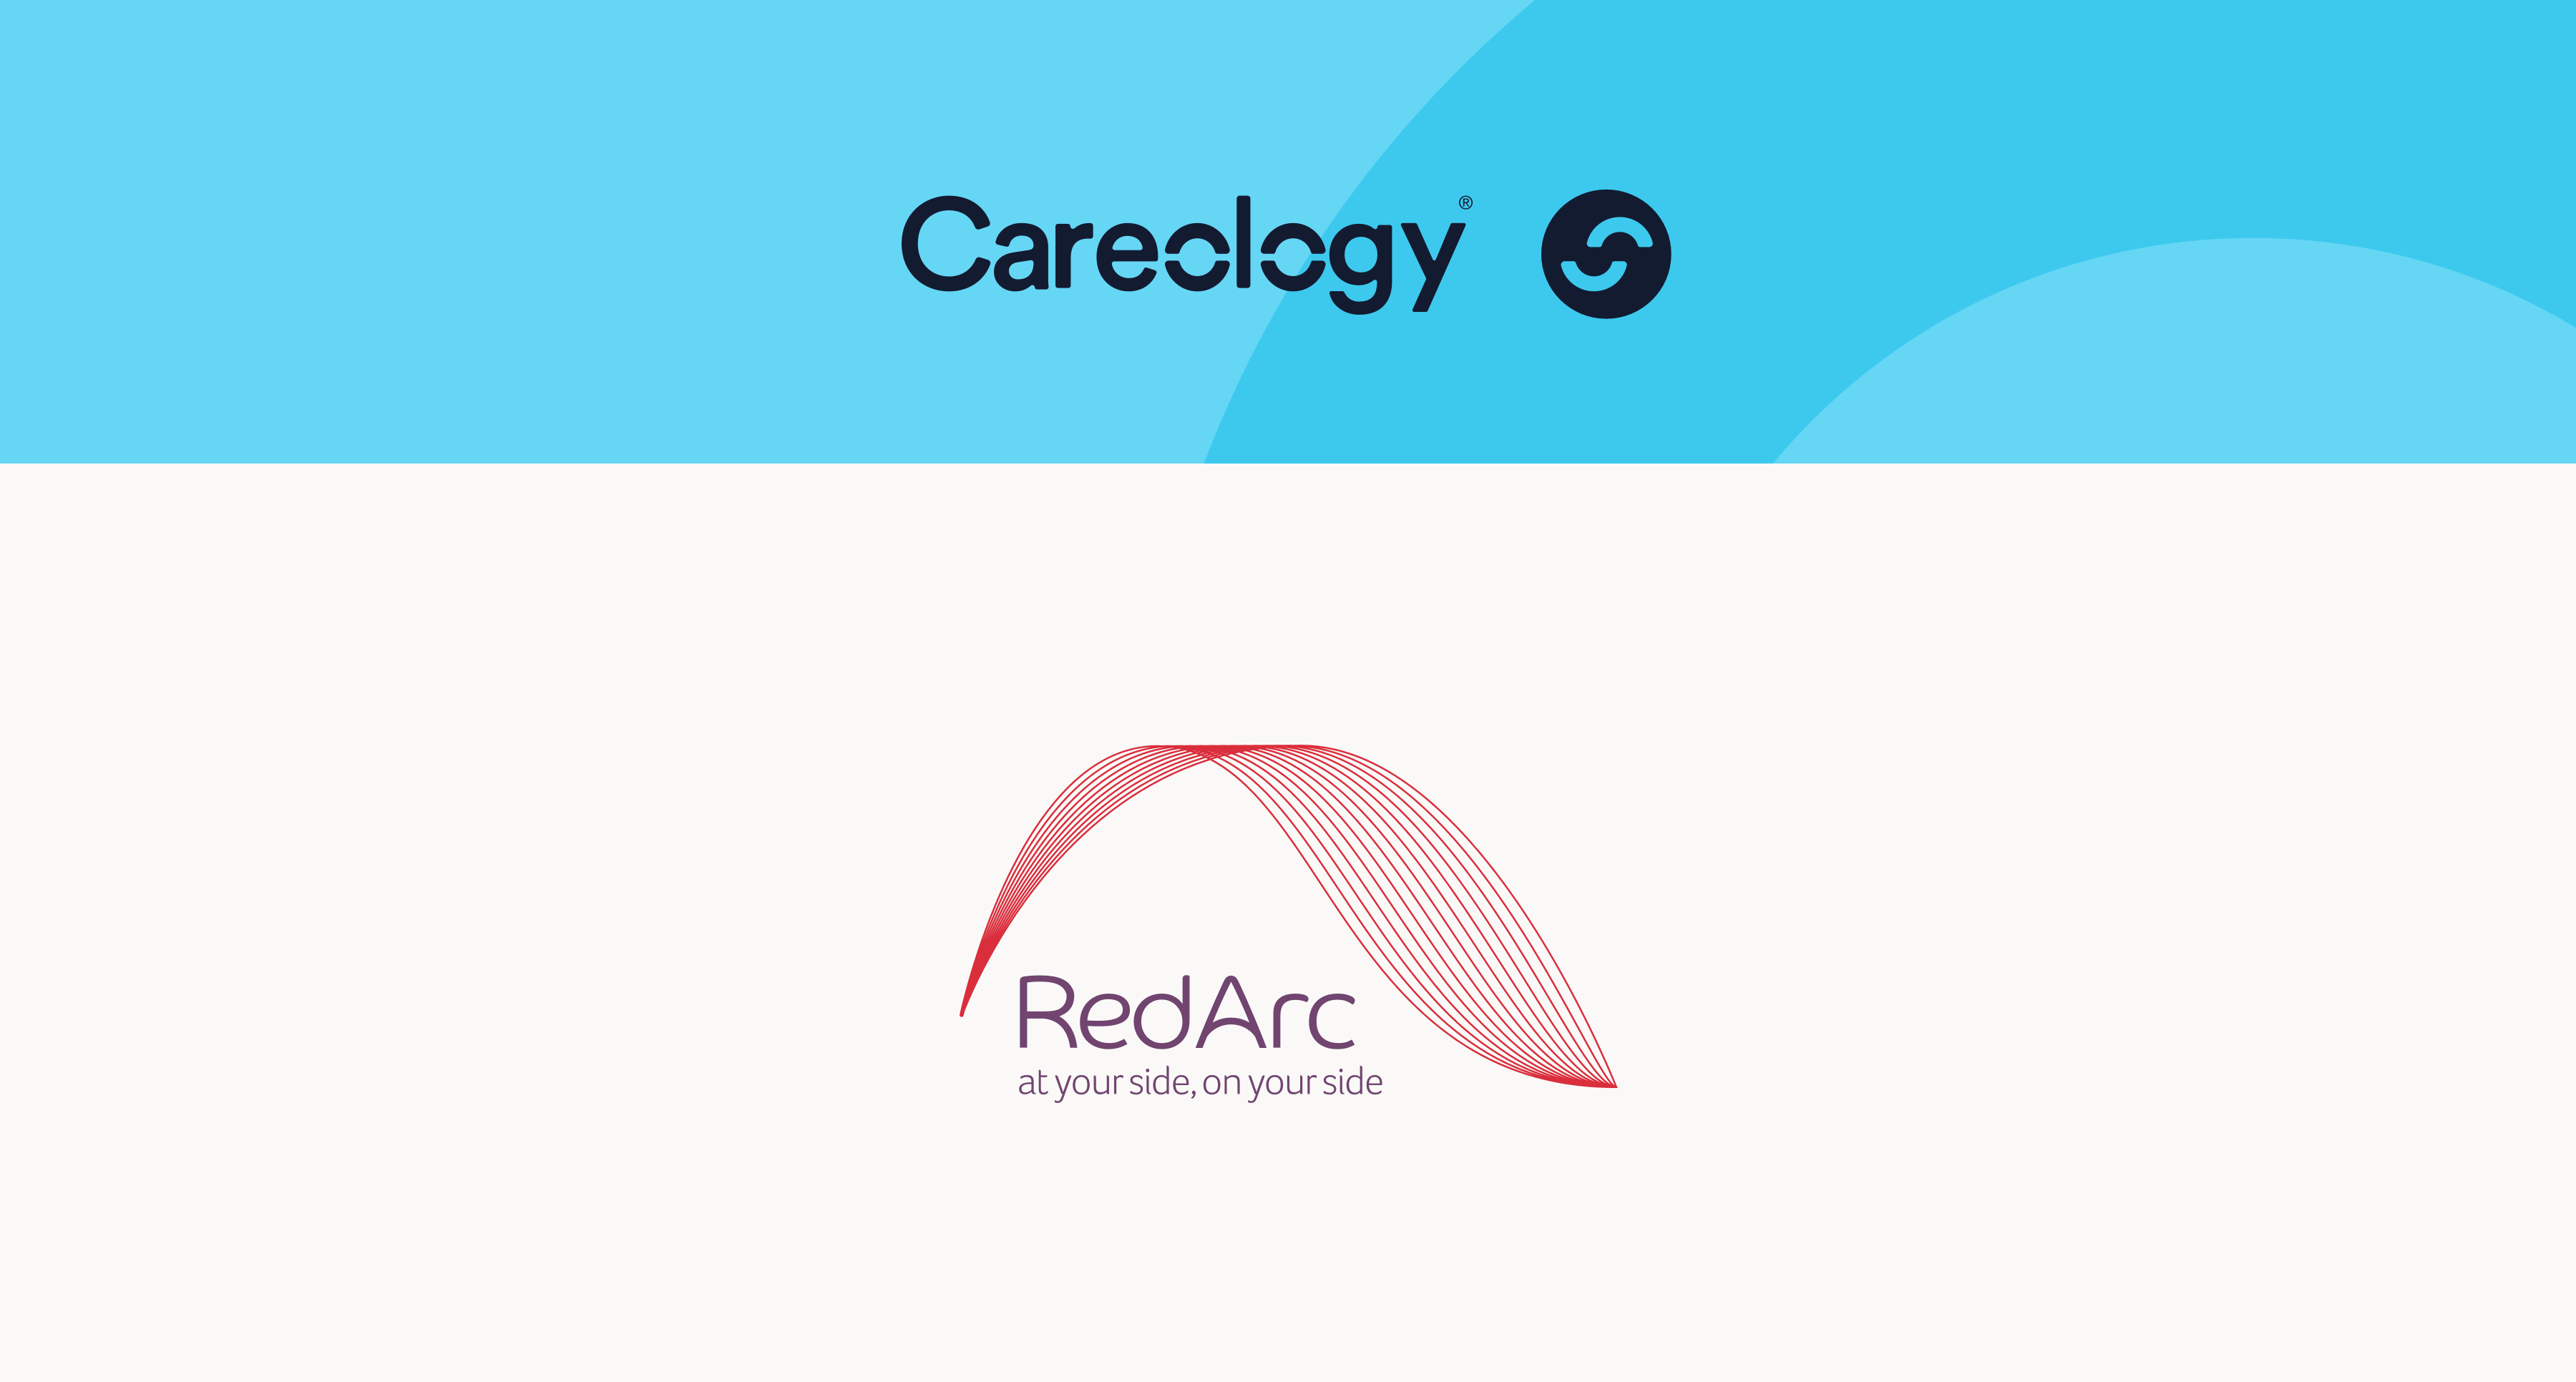 Careology forges new partnership with RedArc